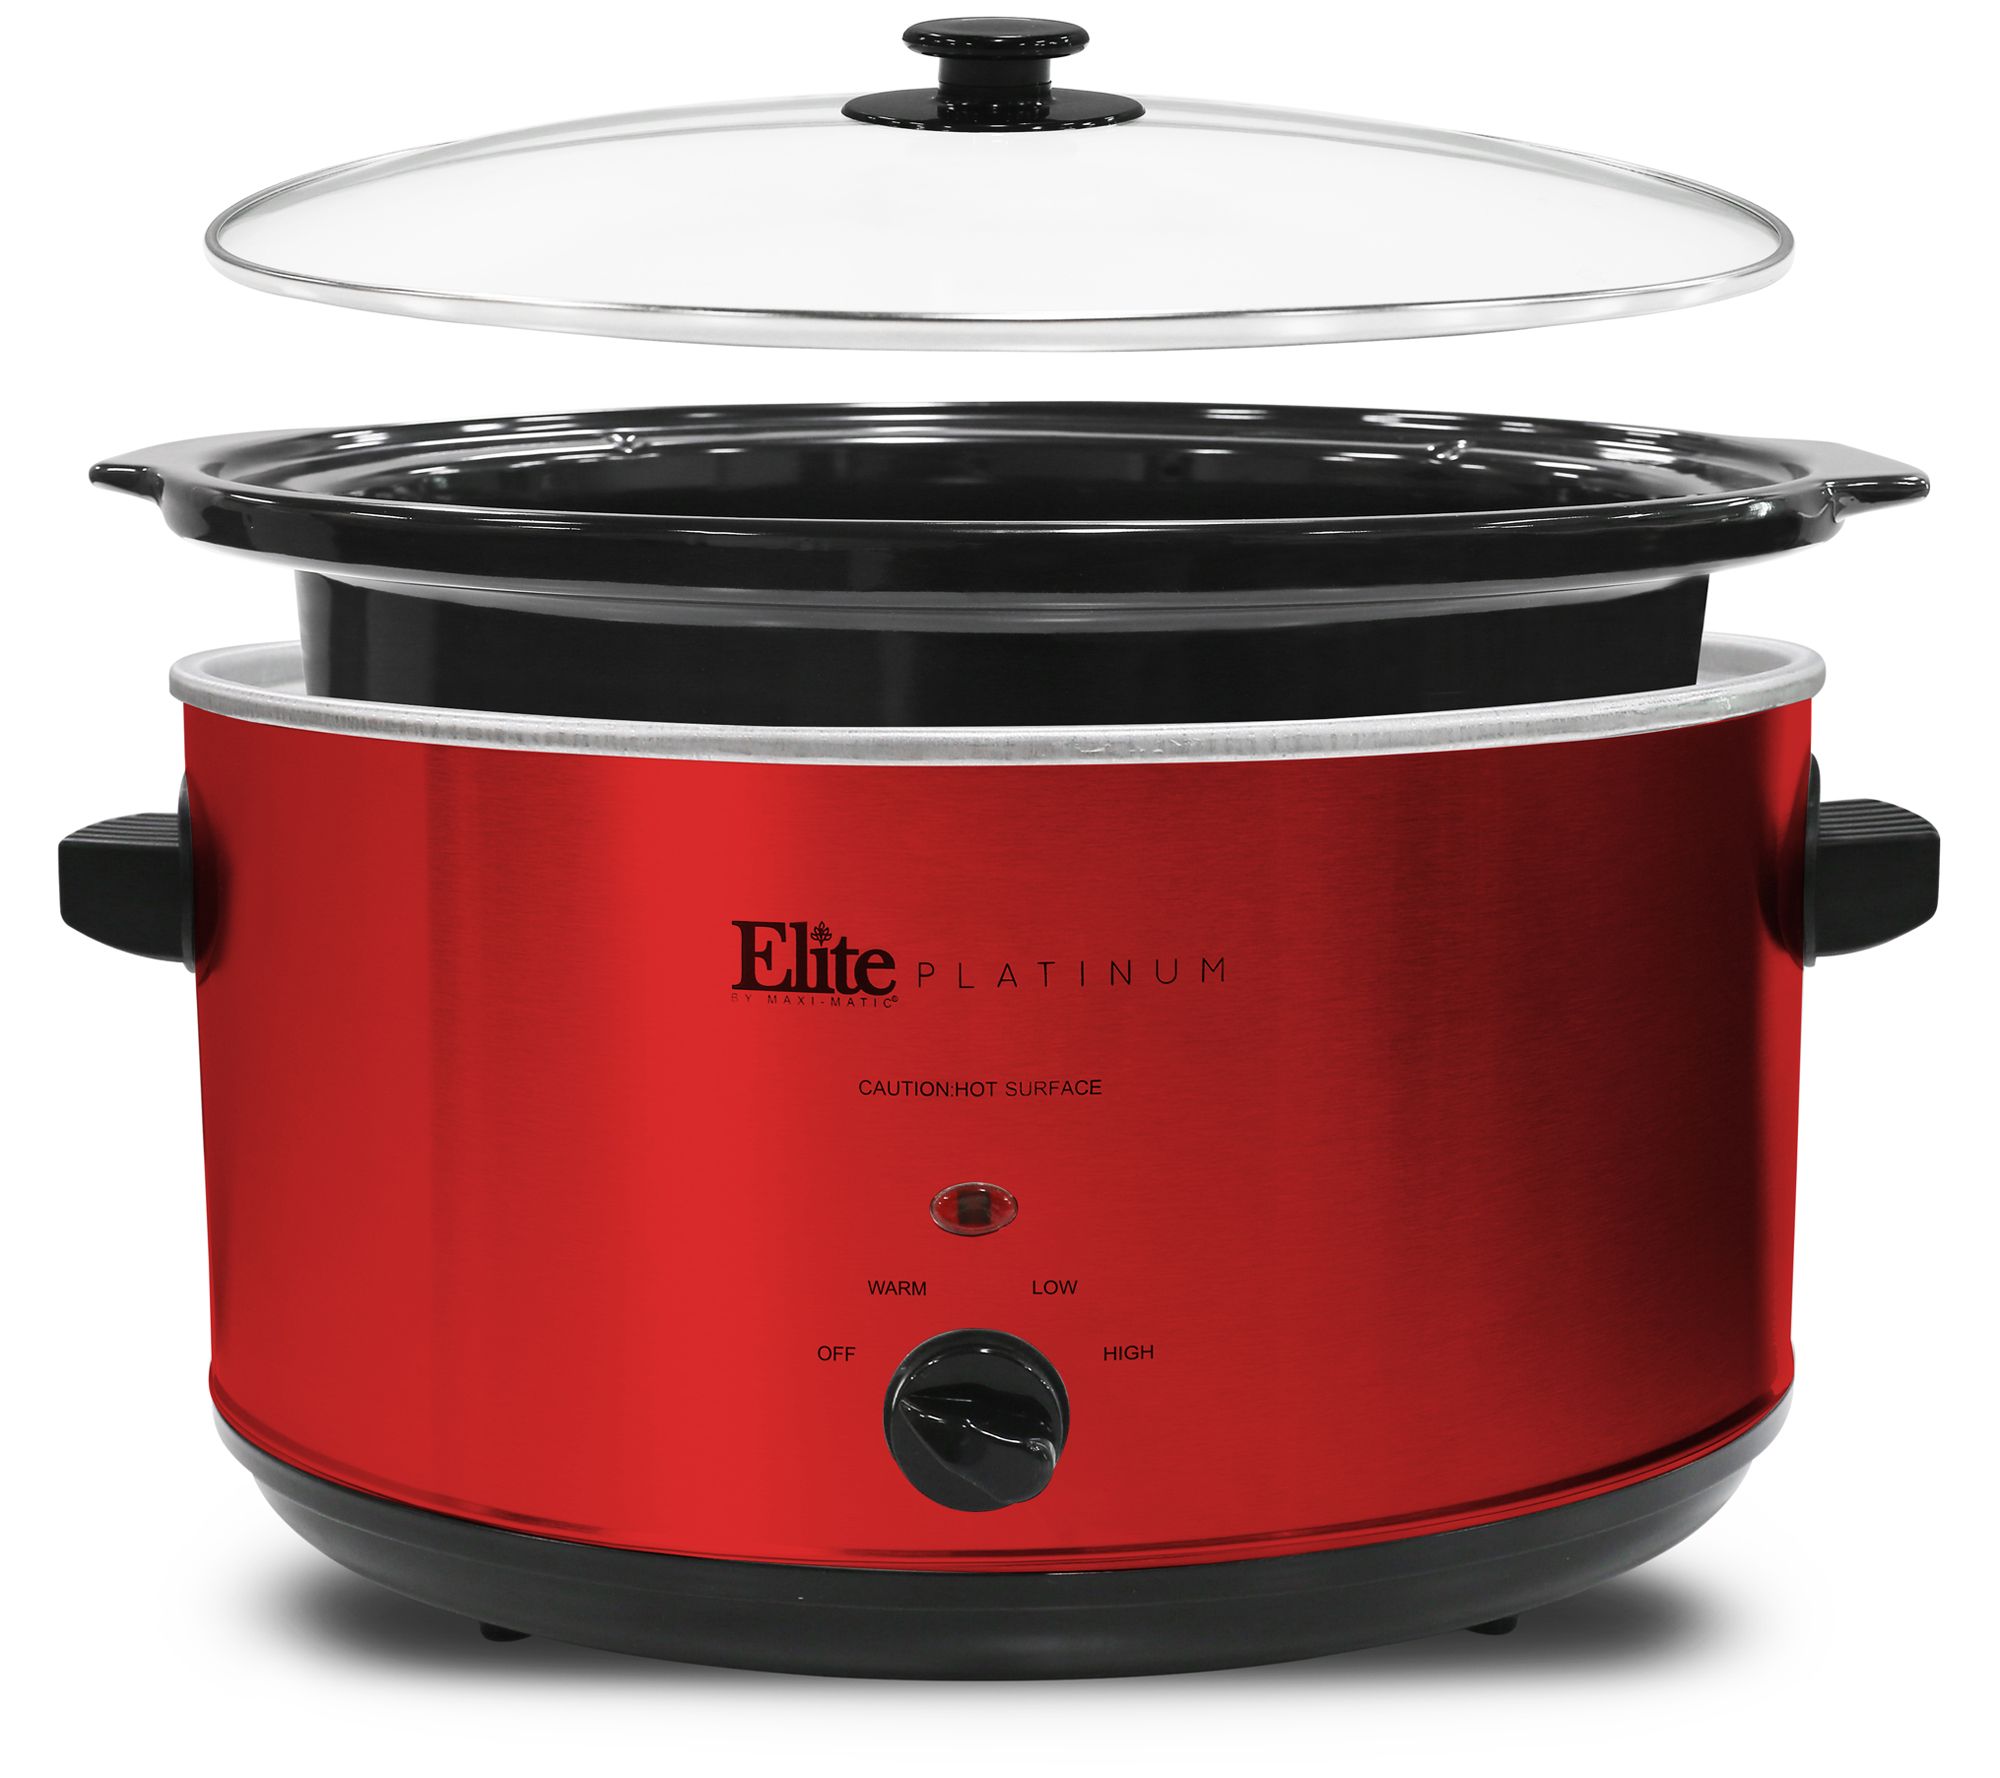 Buy the Elite Gourmet Maxi-Matic 2QT Oval Stainless Steel Slow Cooker